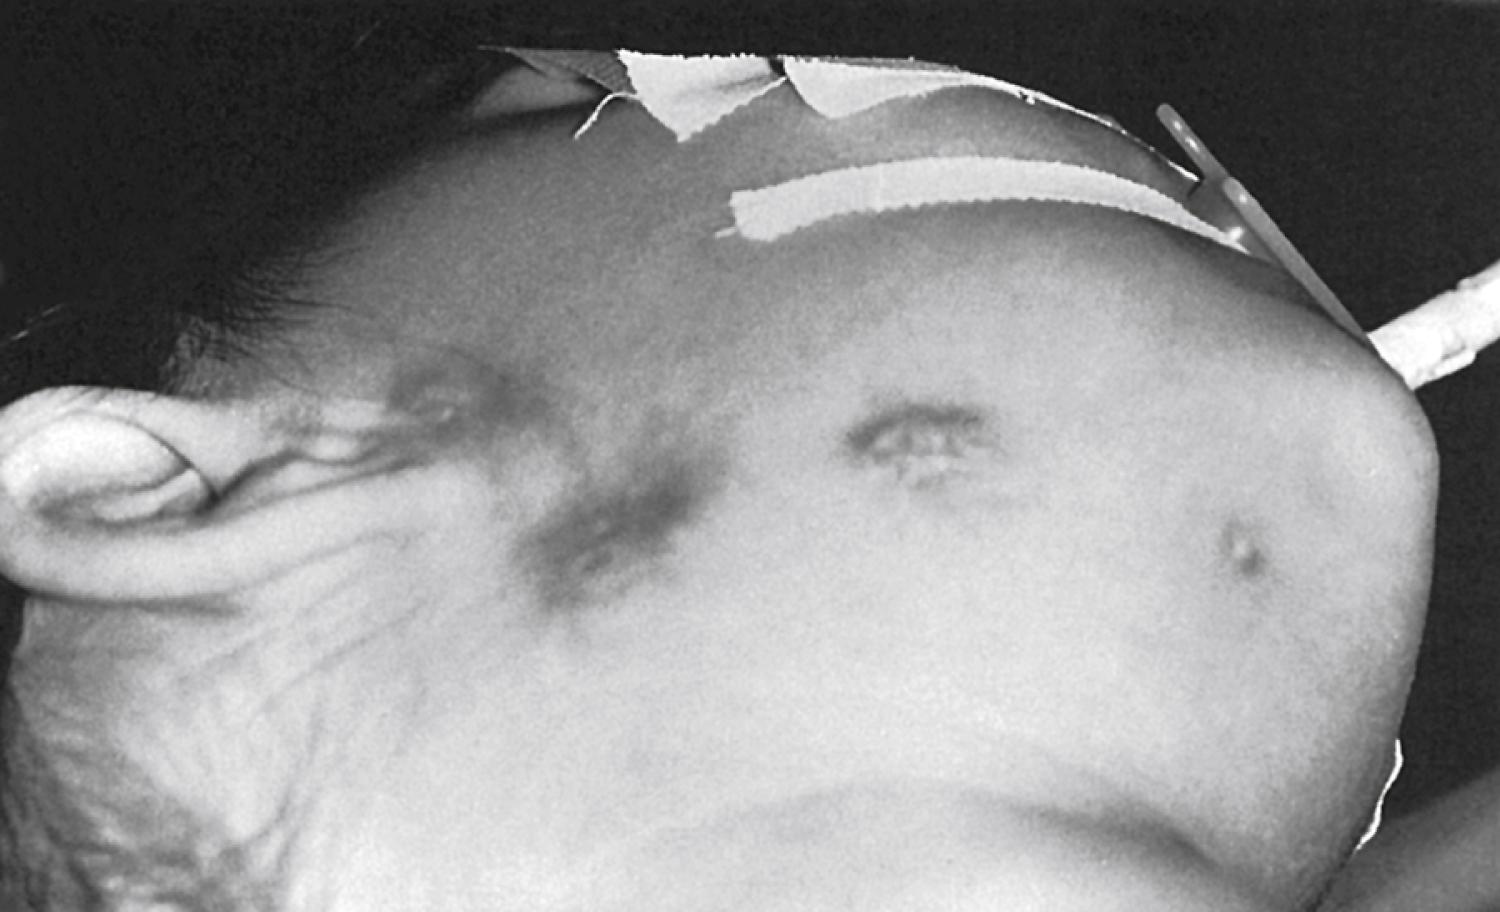 Fig. 48.6, Atypical mycobacterial infection frequently involves the submandibular triangle and preauricular regions.